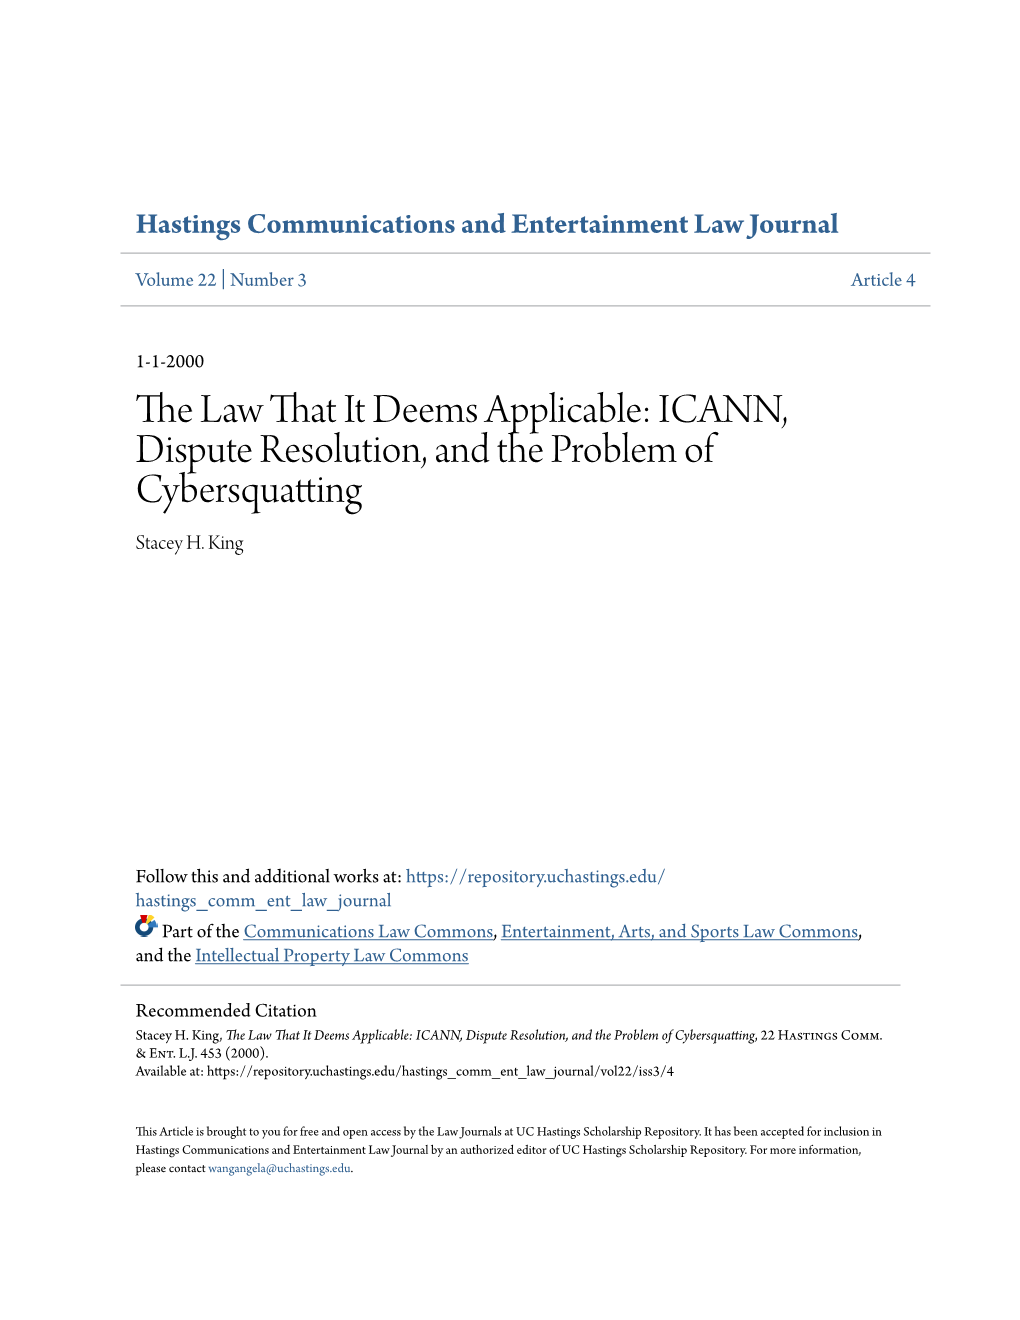 ICANN, Dispute Resolution, and the Problem of Cybersquatting Stacey H